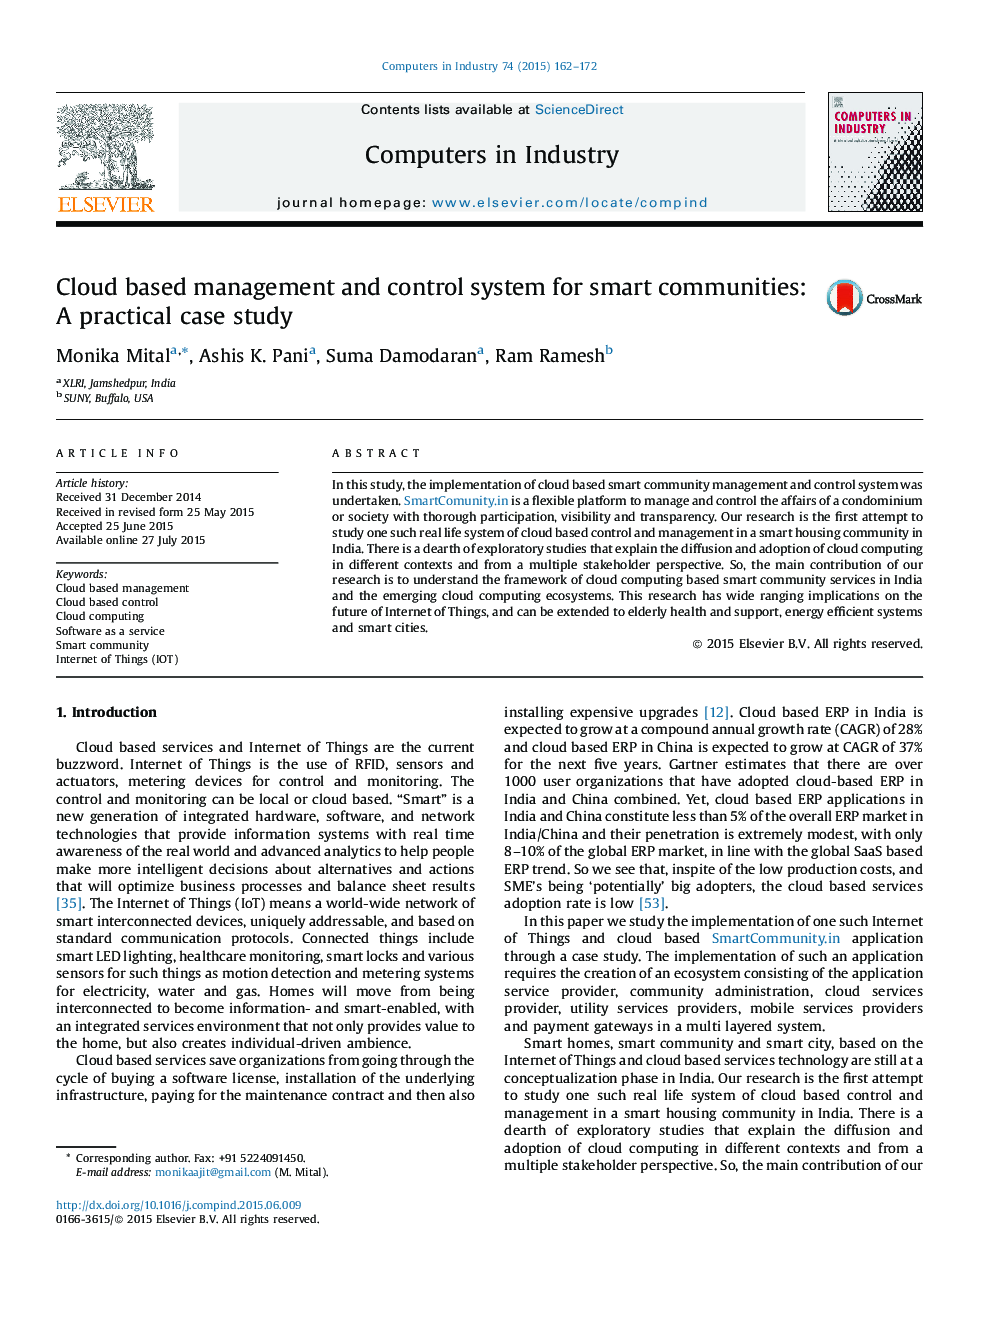 Cloud based management and control system for smart communities: A practical case study